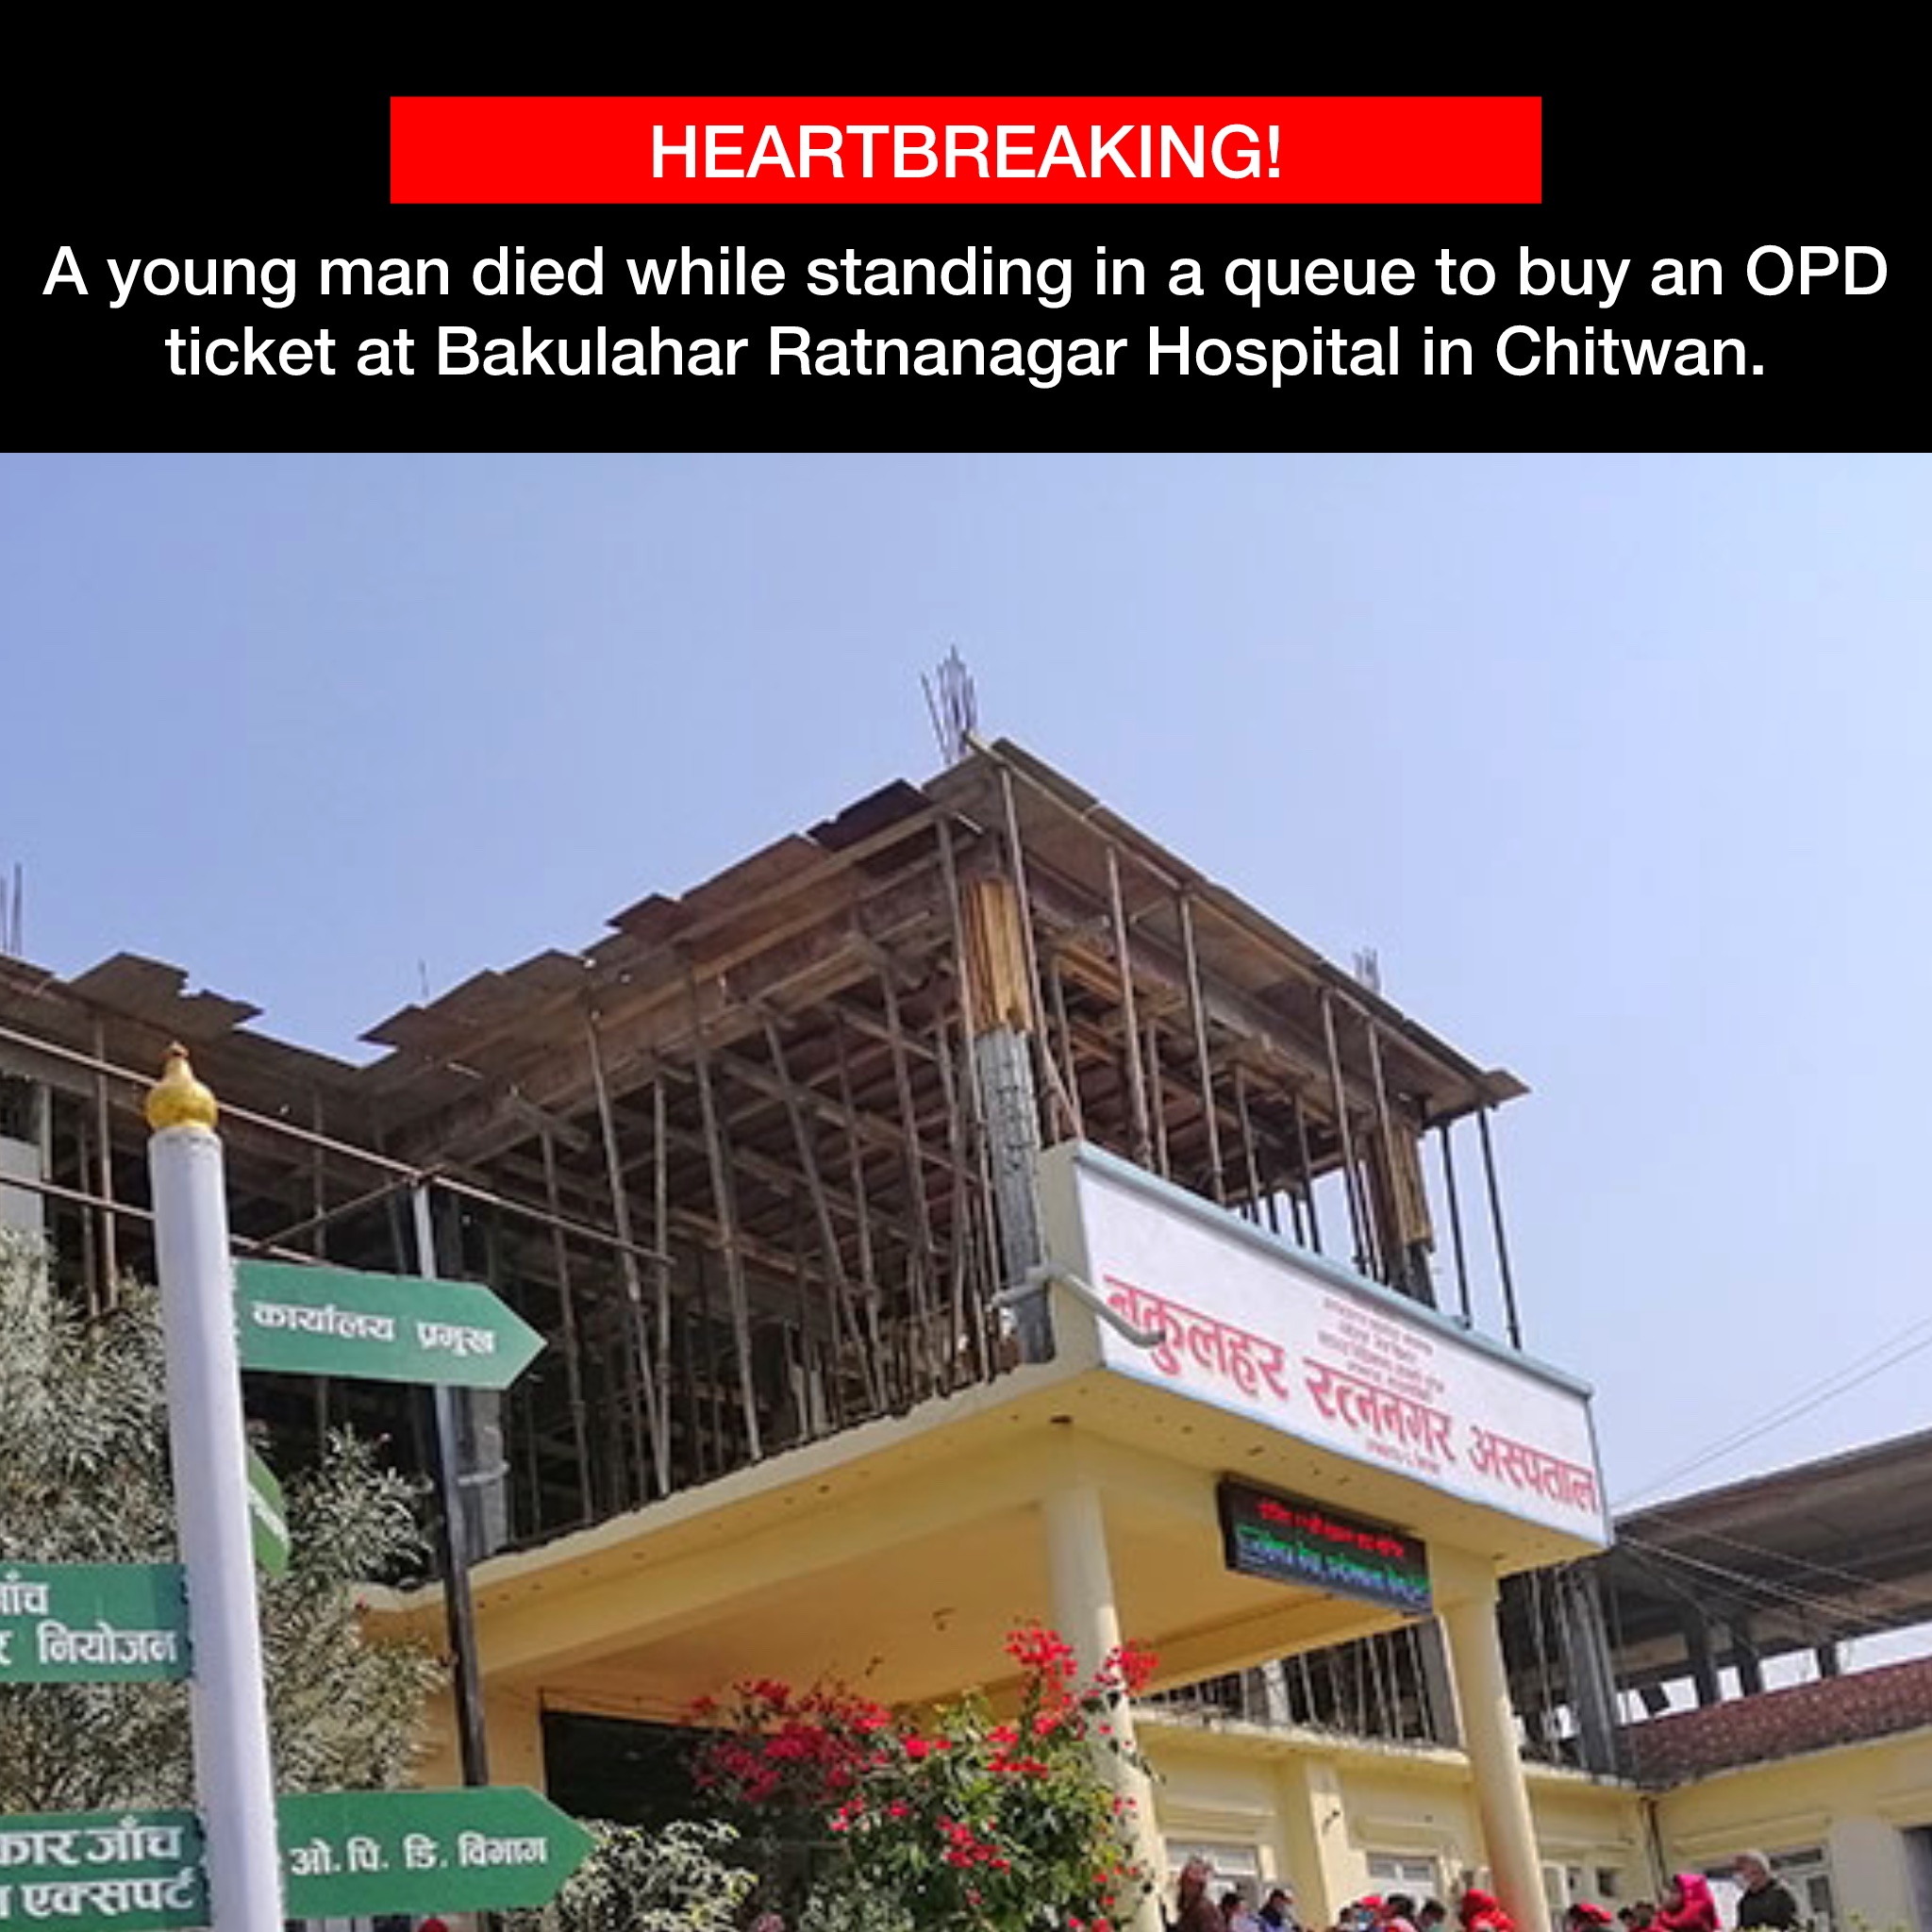 Tragic Loss: Young Man Dies While Waiting for OPD Ticket in Chitwan Hospital Queue